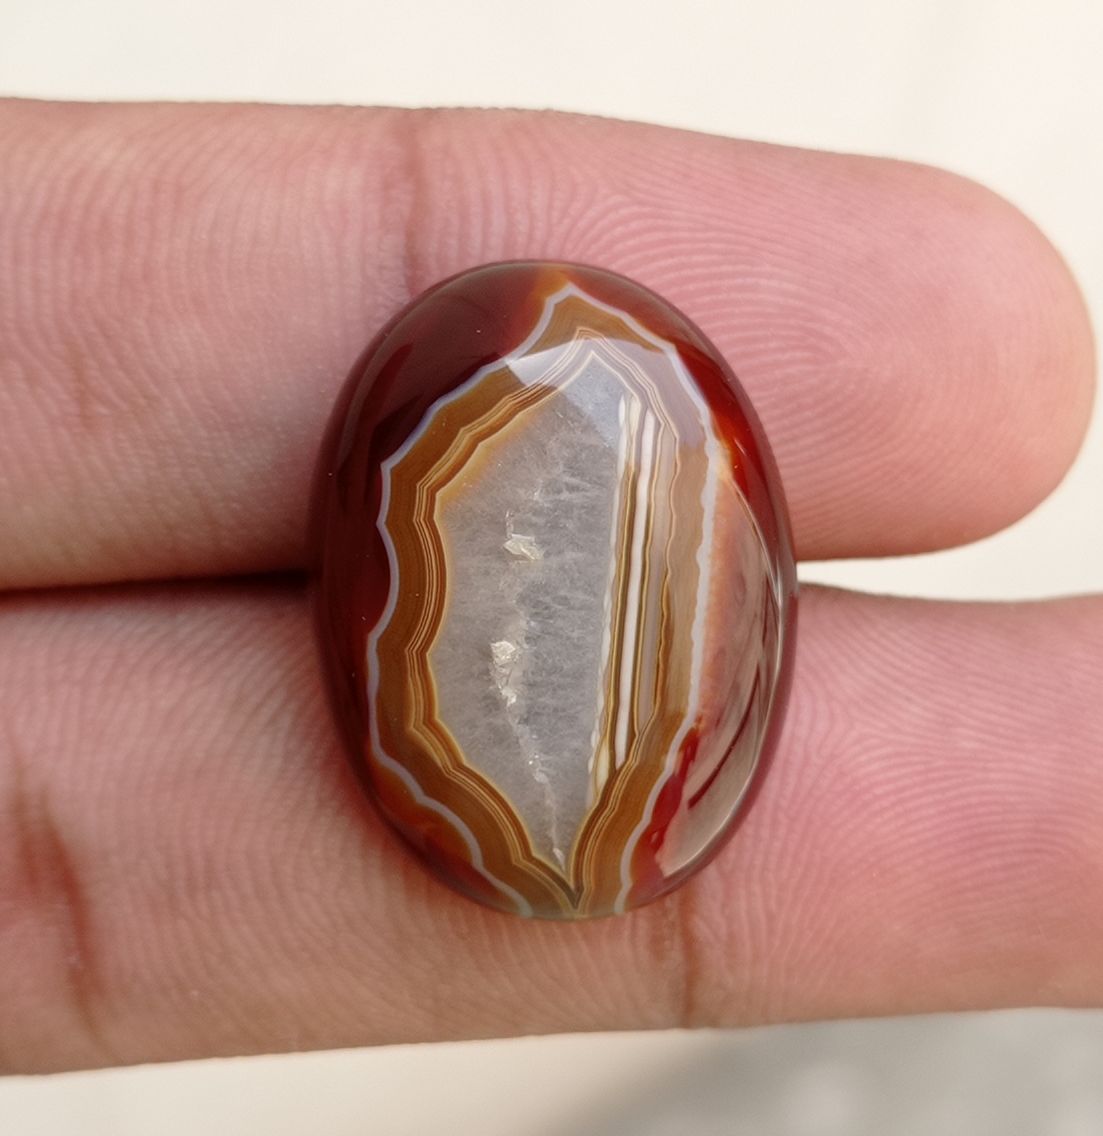 Fortified Agate Cabochon - Sulaimani Aqeeq - 26x19mm